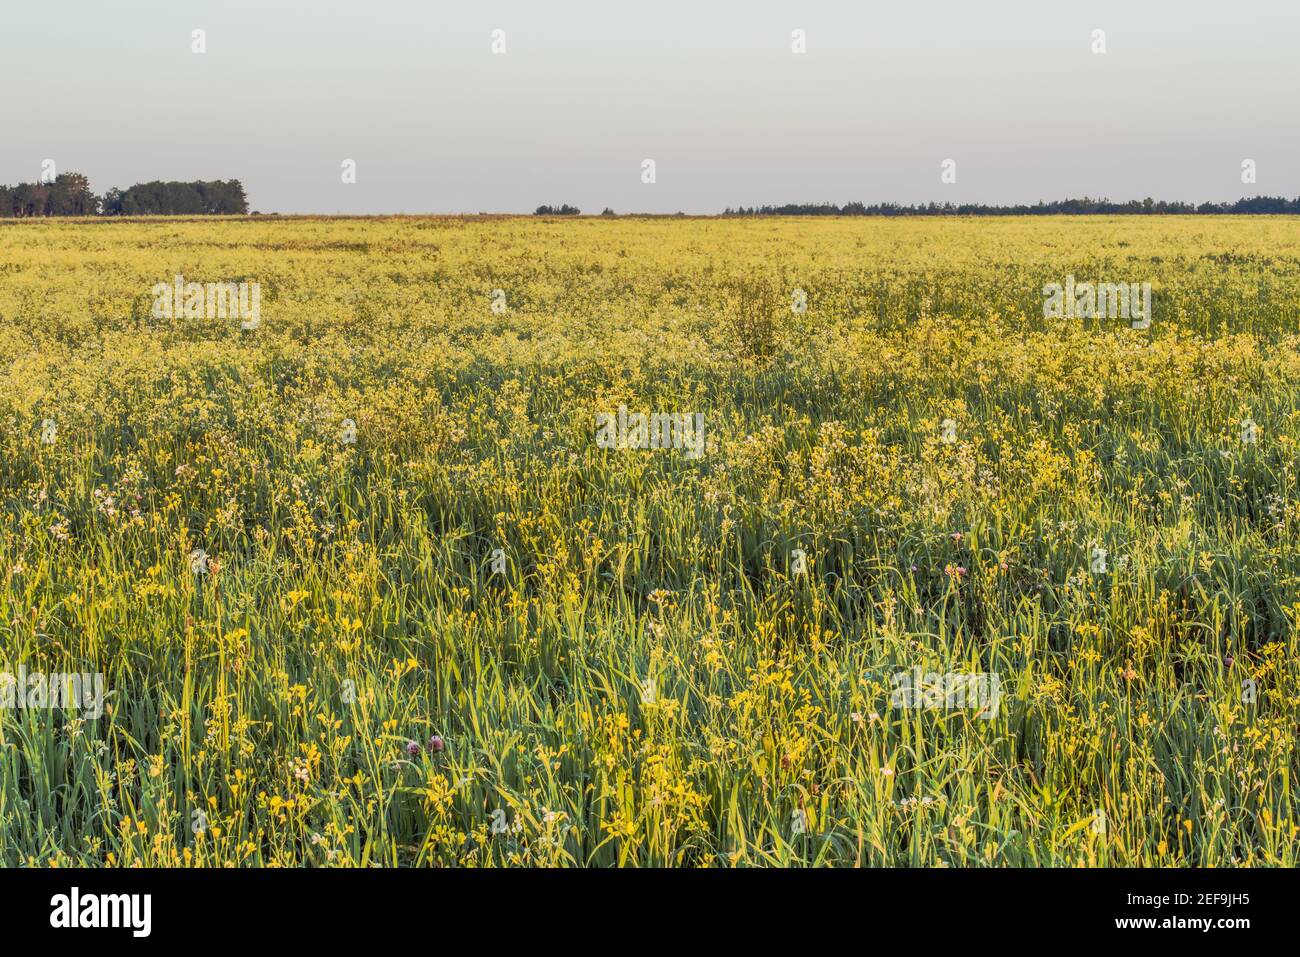 View of a flower meadow in the field. Stock Photo